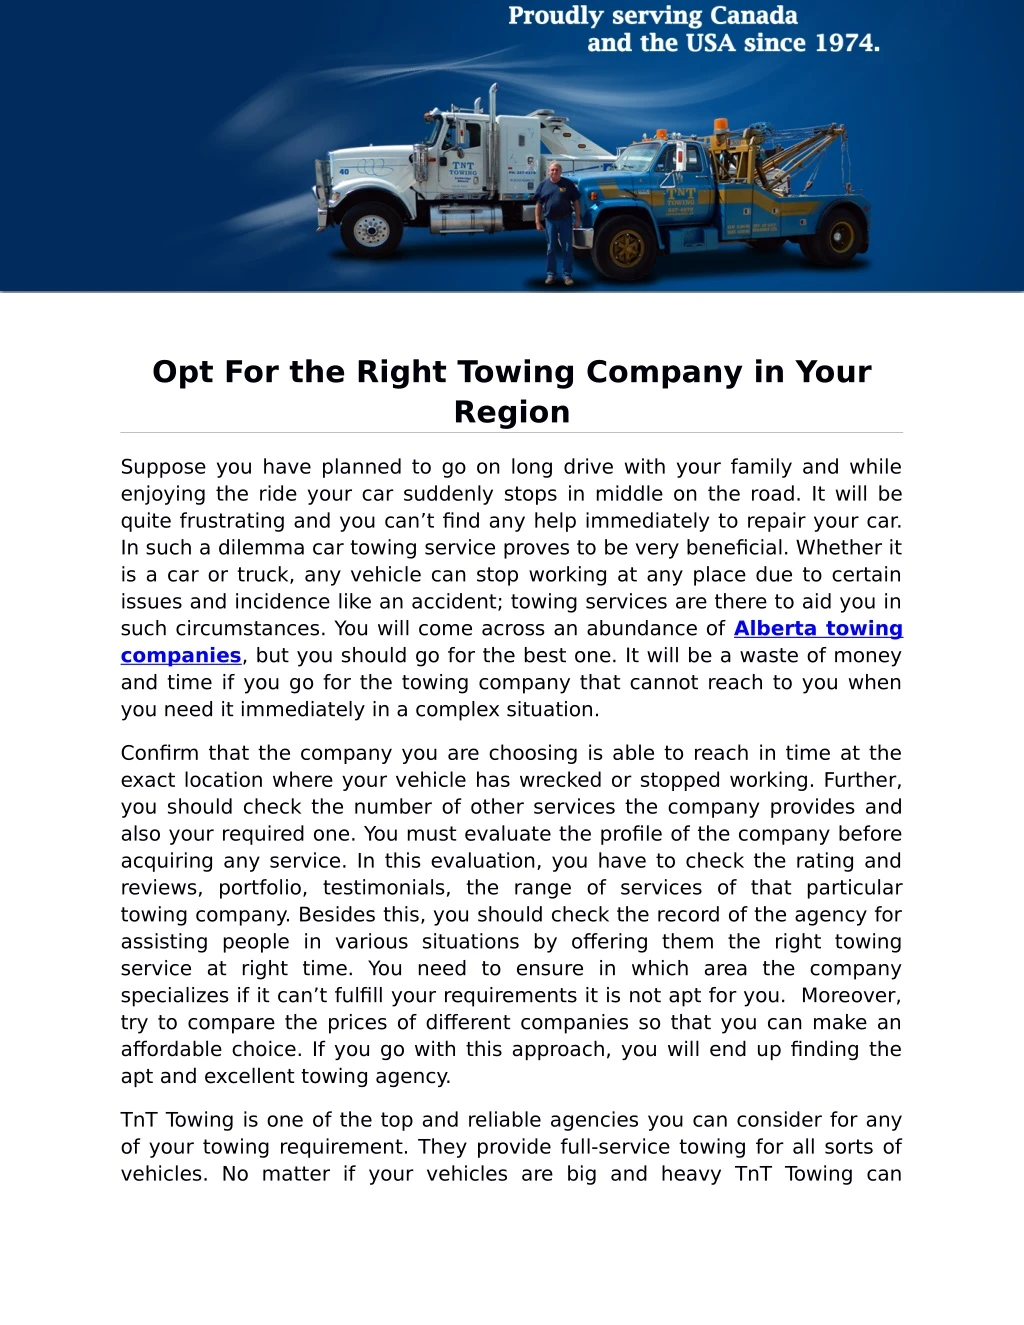 opt for the right towing company in your region